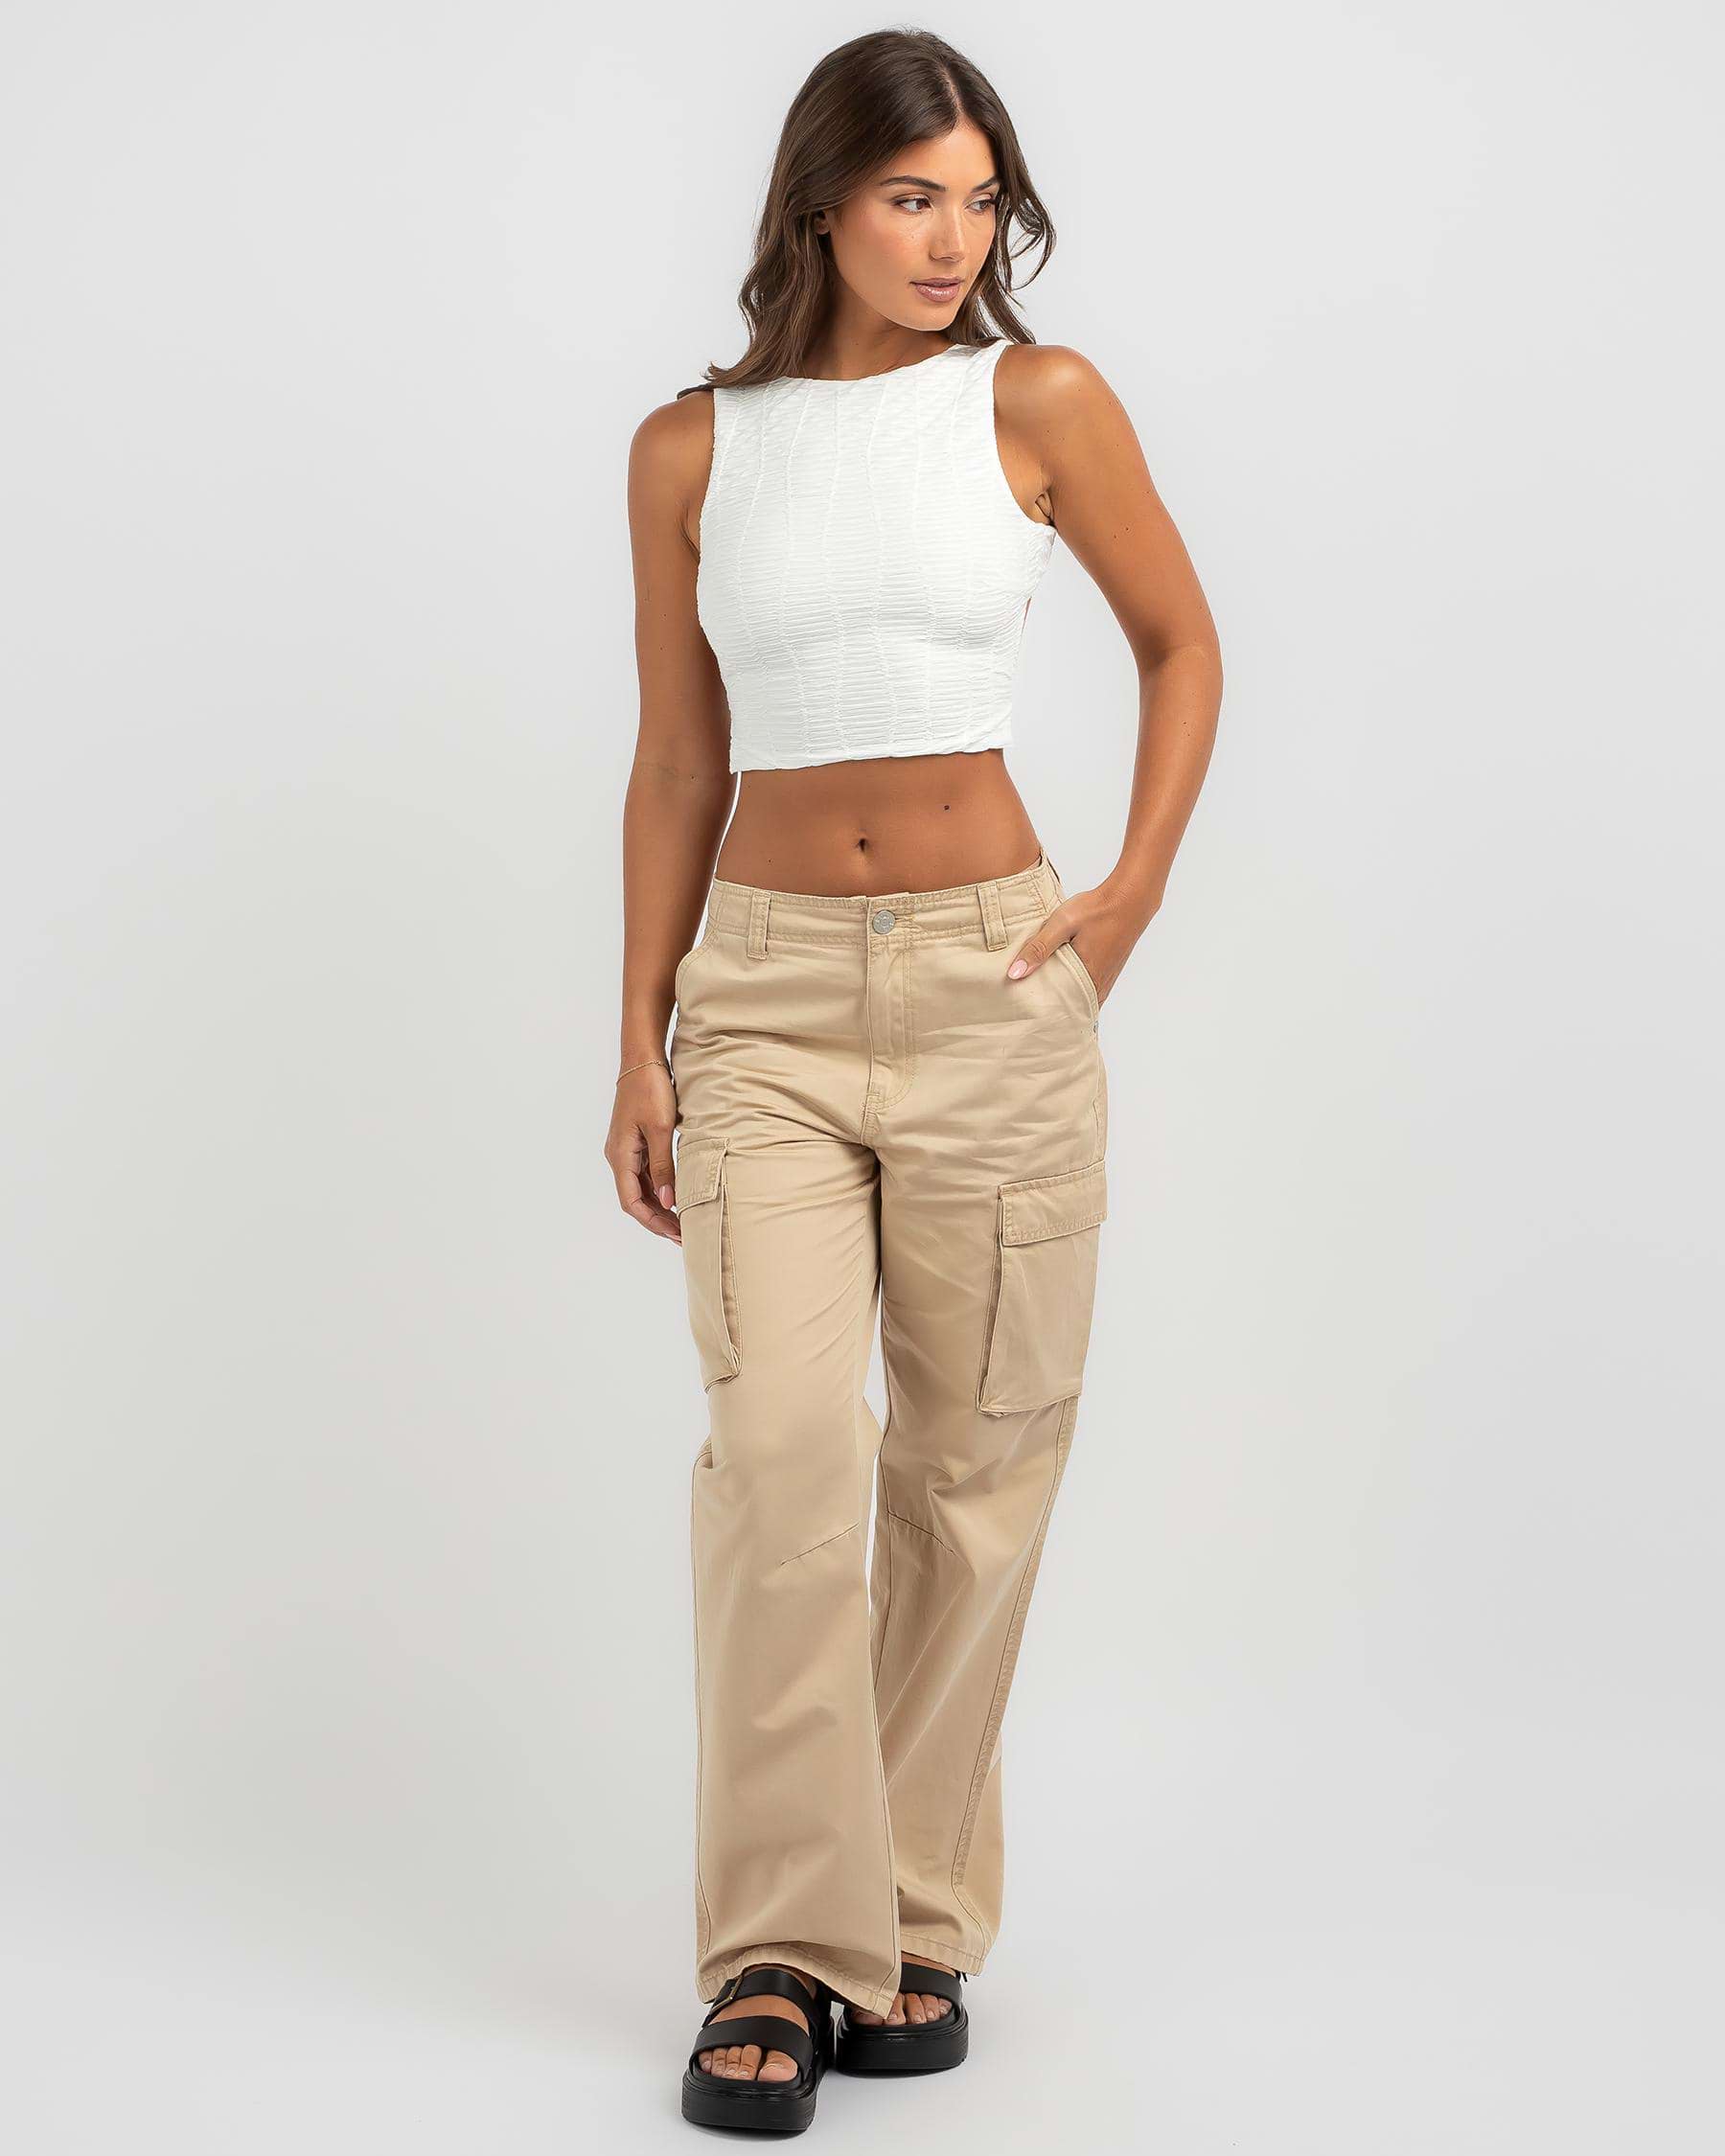 Shop Luvalot Annie Tie Back Top In White - Fast Shipping & Easy Returns ...